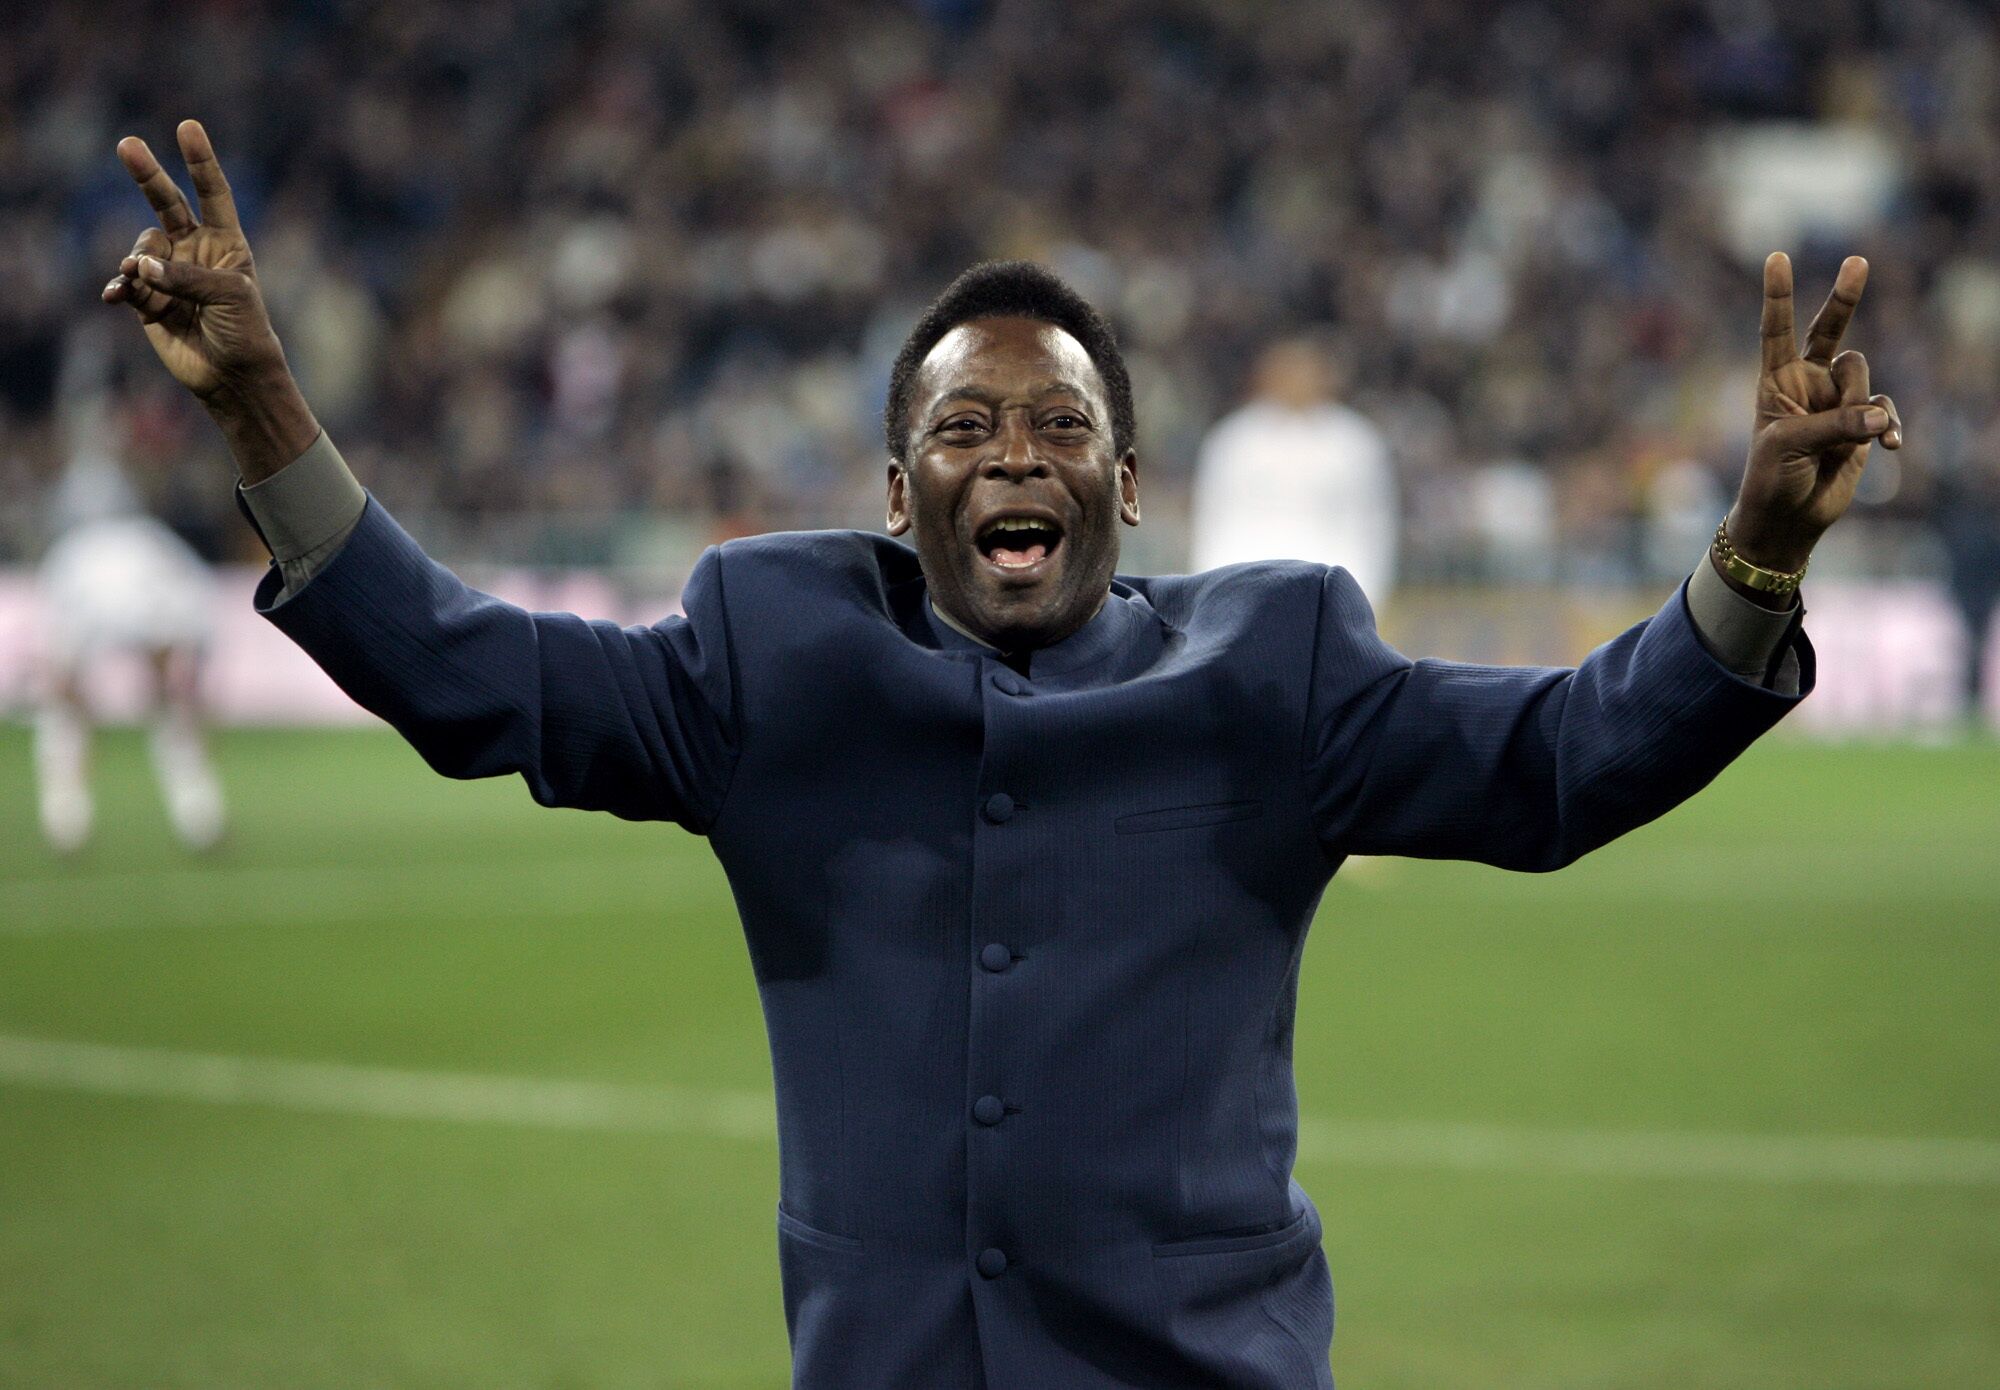 Brazil's soccer legend Pele greets the crowd ahead of a Spanish league soccer match.